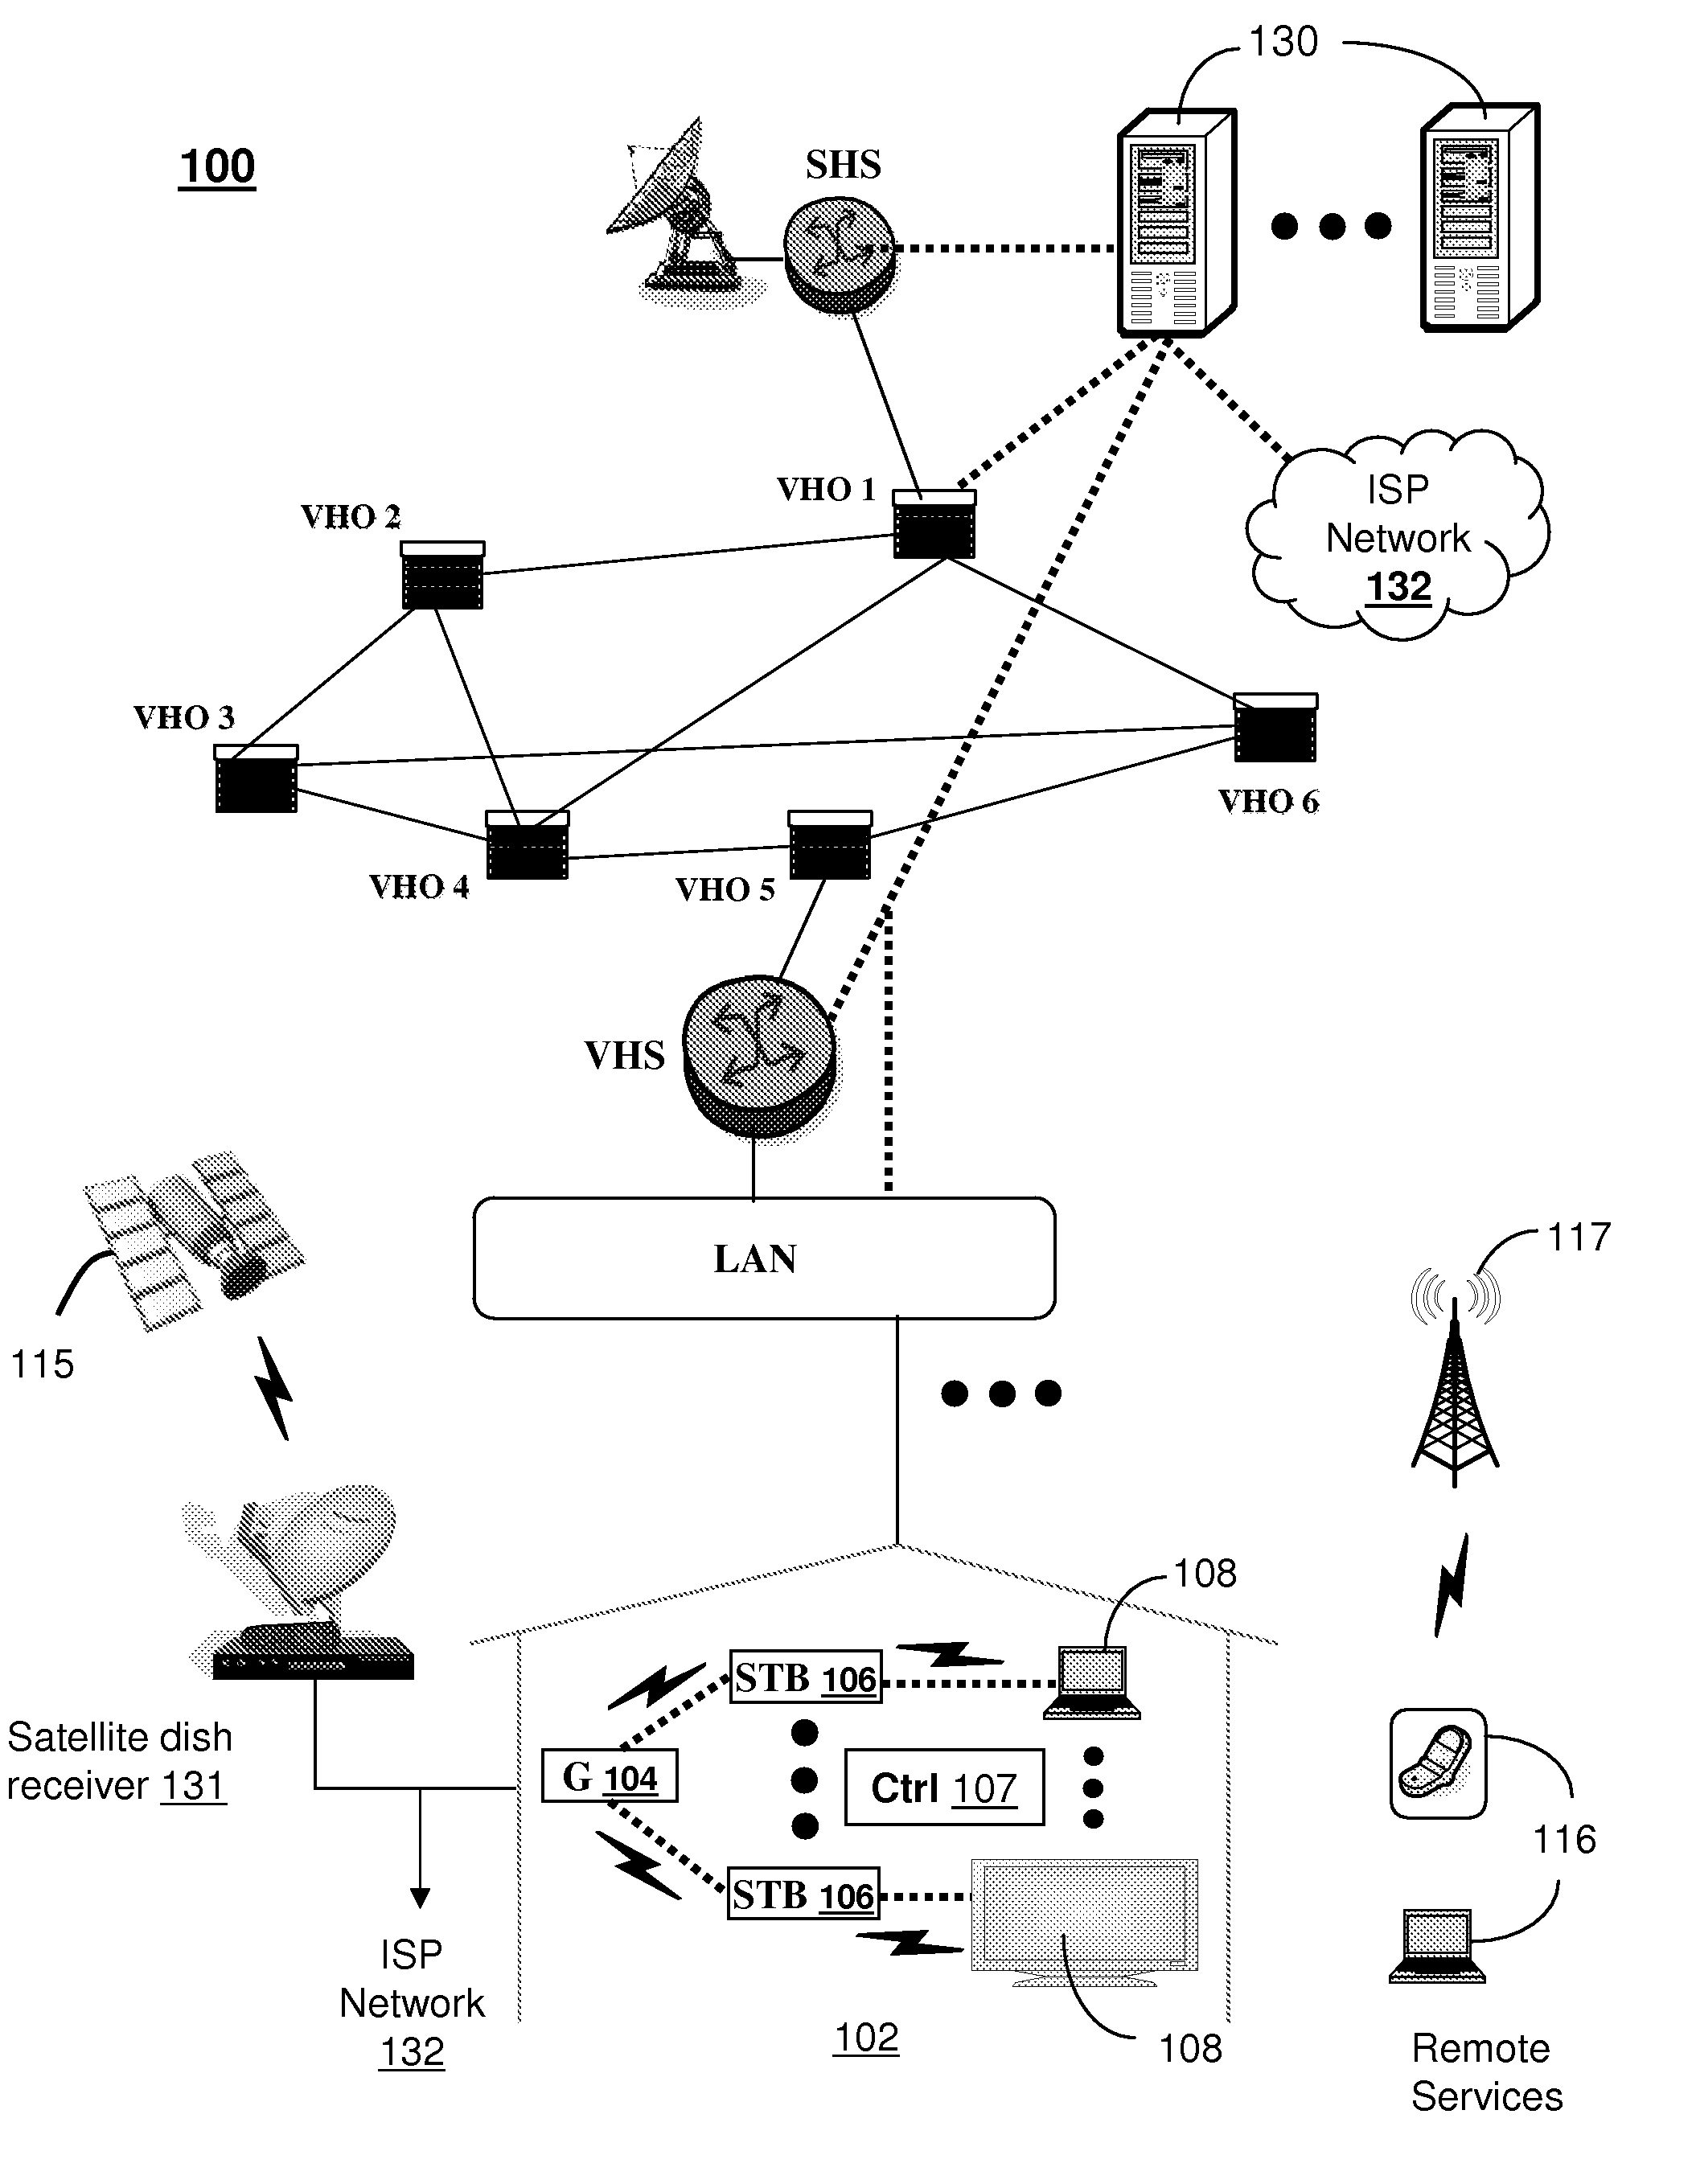 System for managing media content for a personal television channel